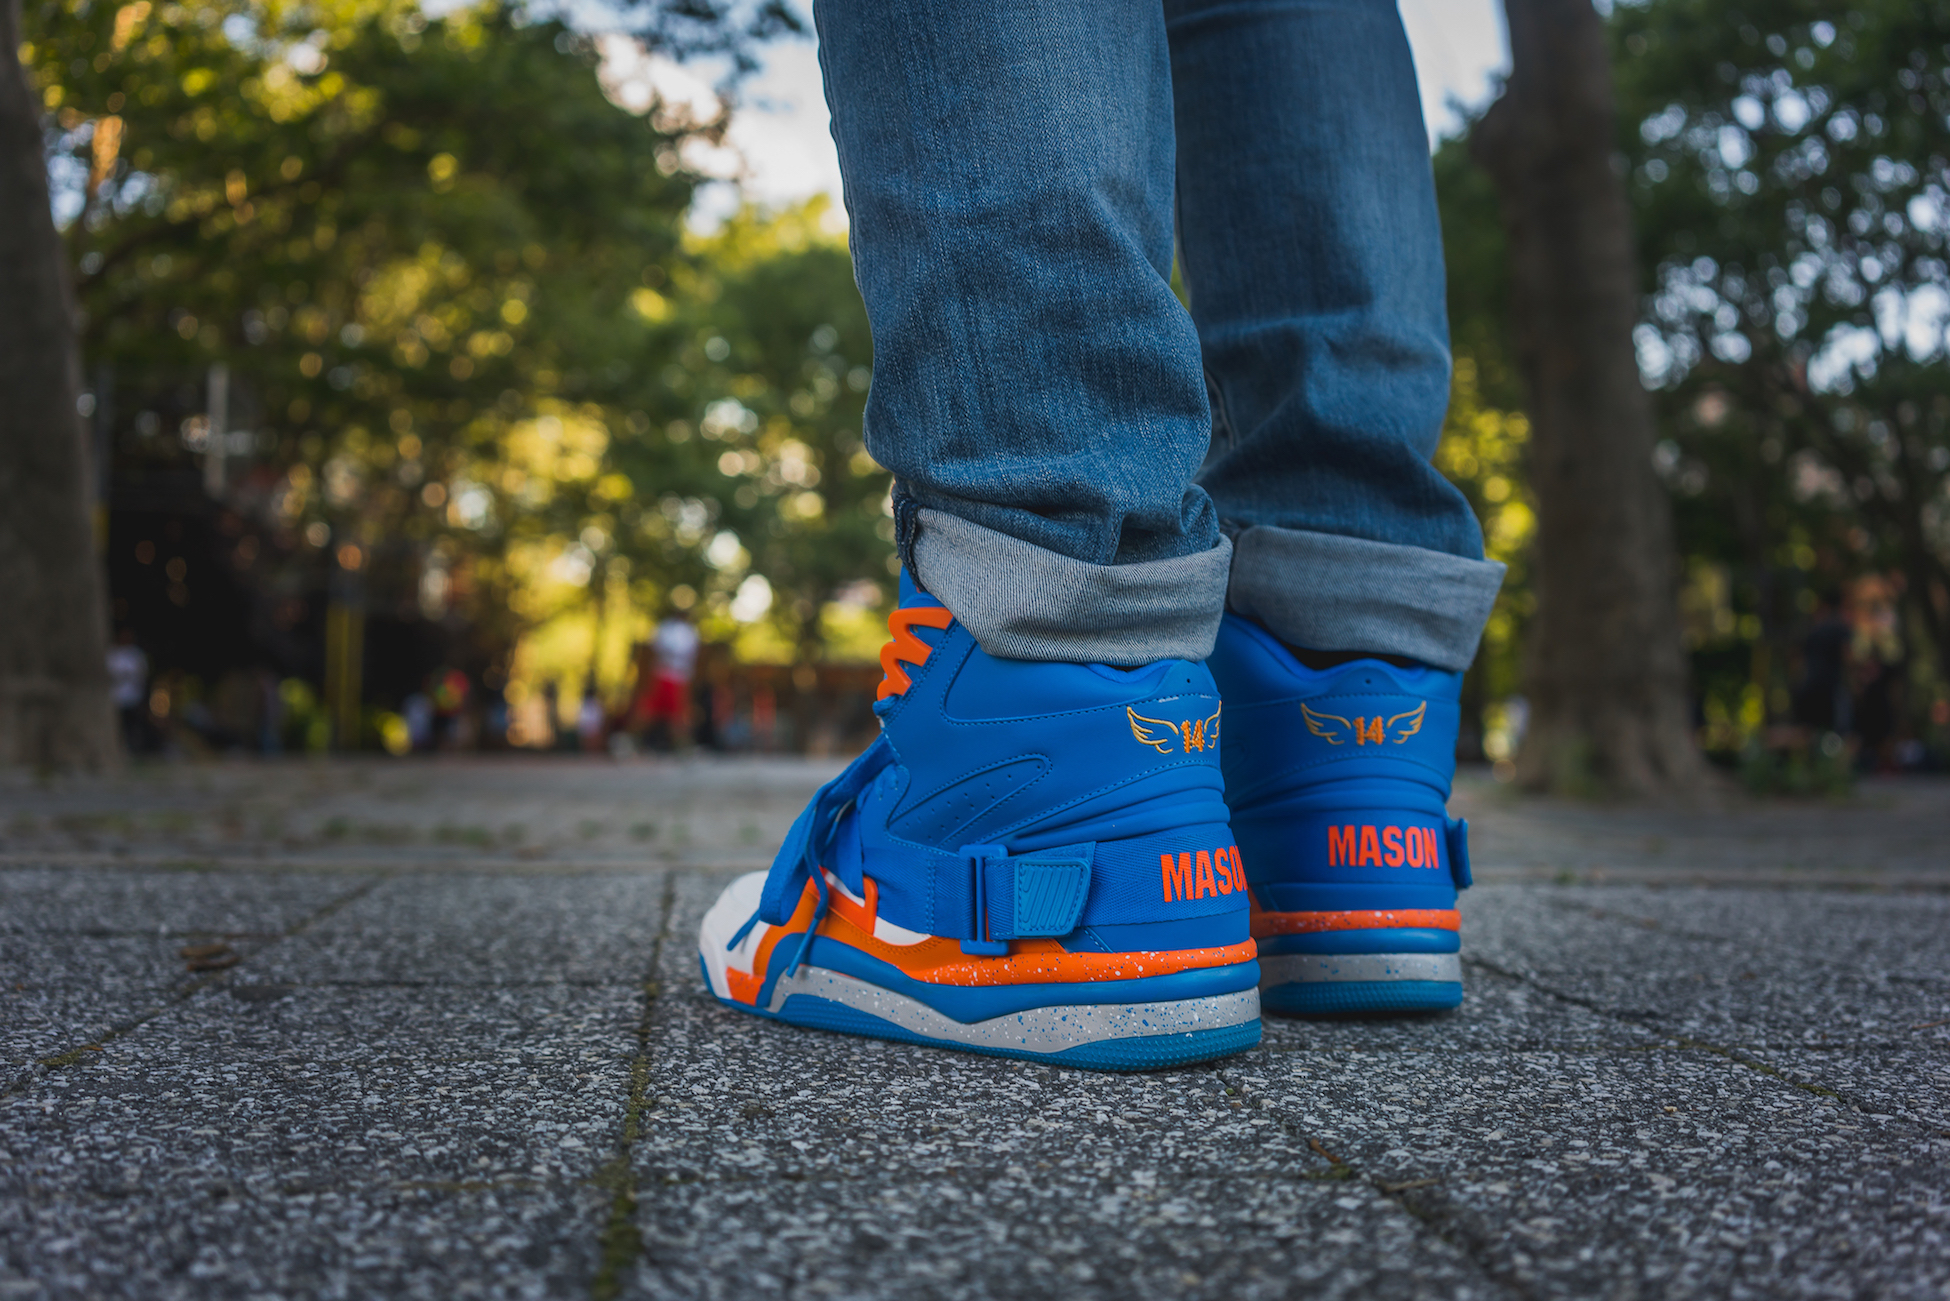 Ewing Partners with Anthony Mason Jr. for an Ewing Concept, Proceeds ...